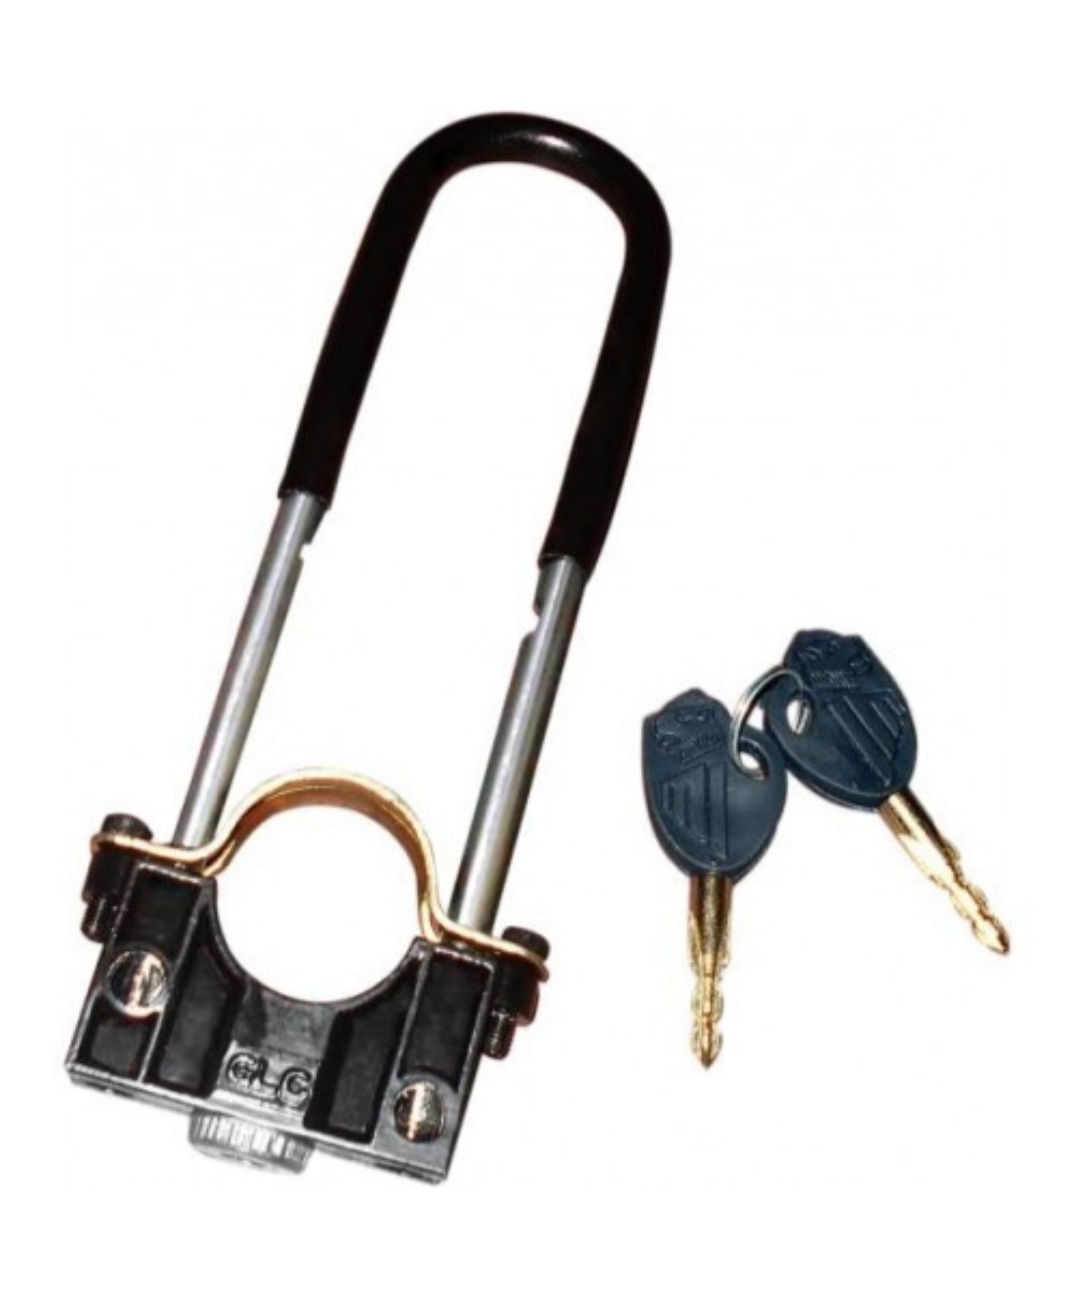 Anti-theft Shocker Key Lock For Front Wheel Of Motorcycles